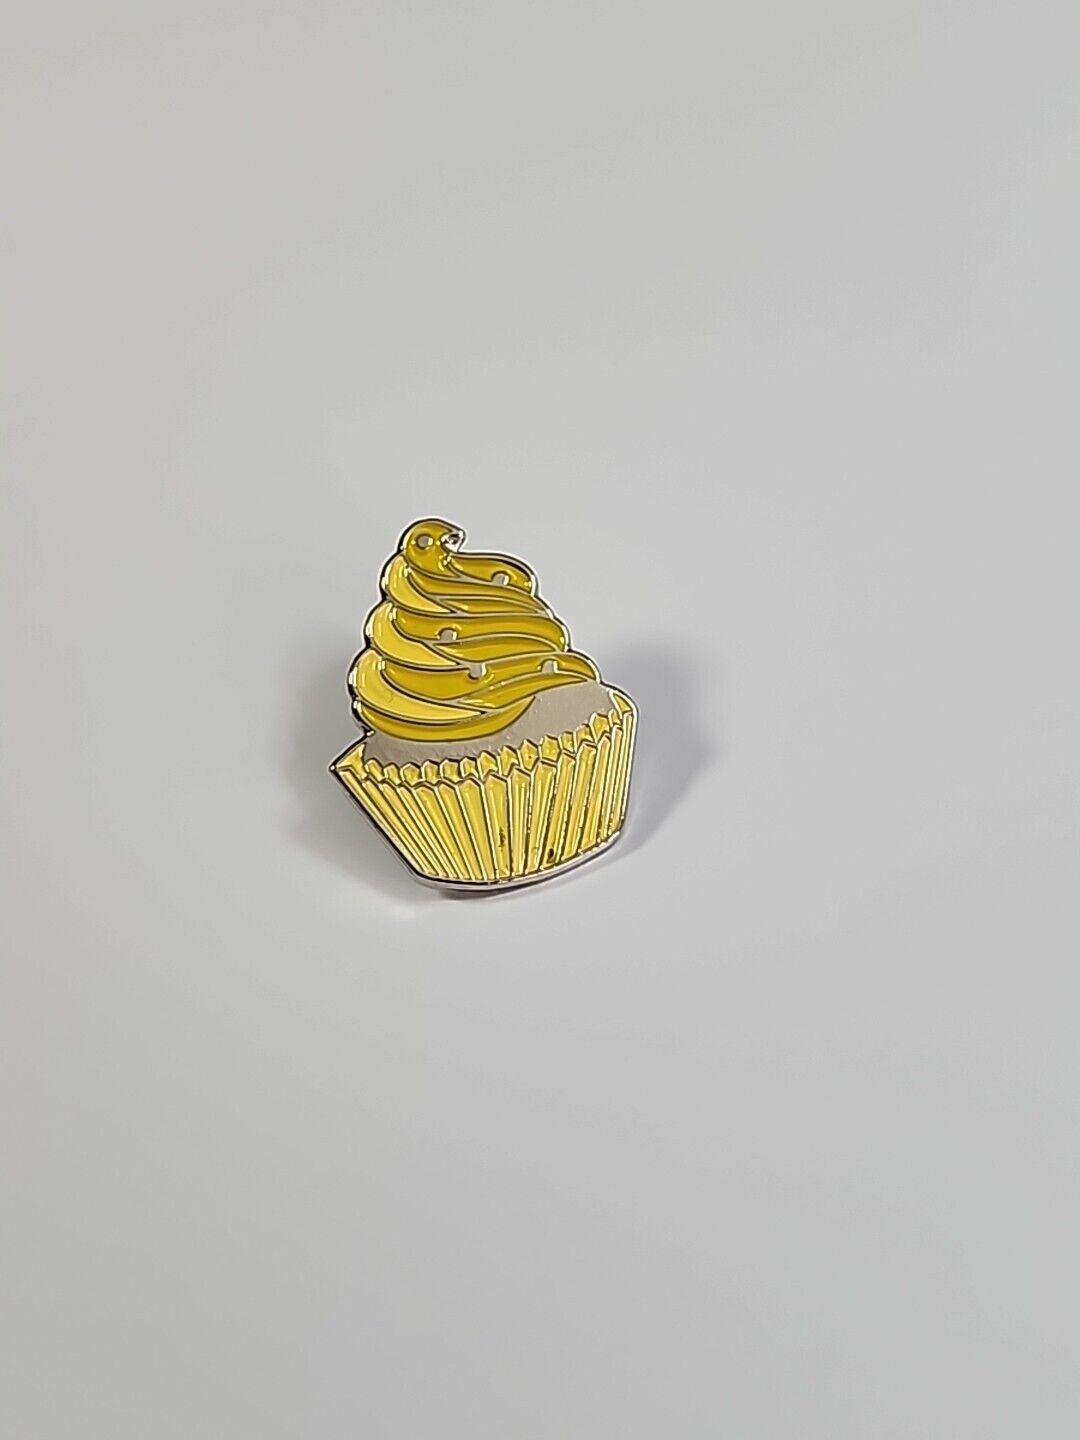 Frosted Cupcake Lapel Pin Yellow & Silver Colors